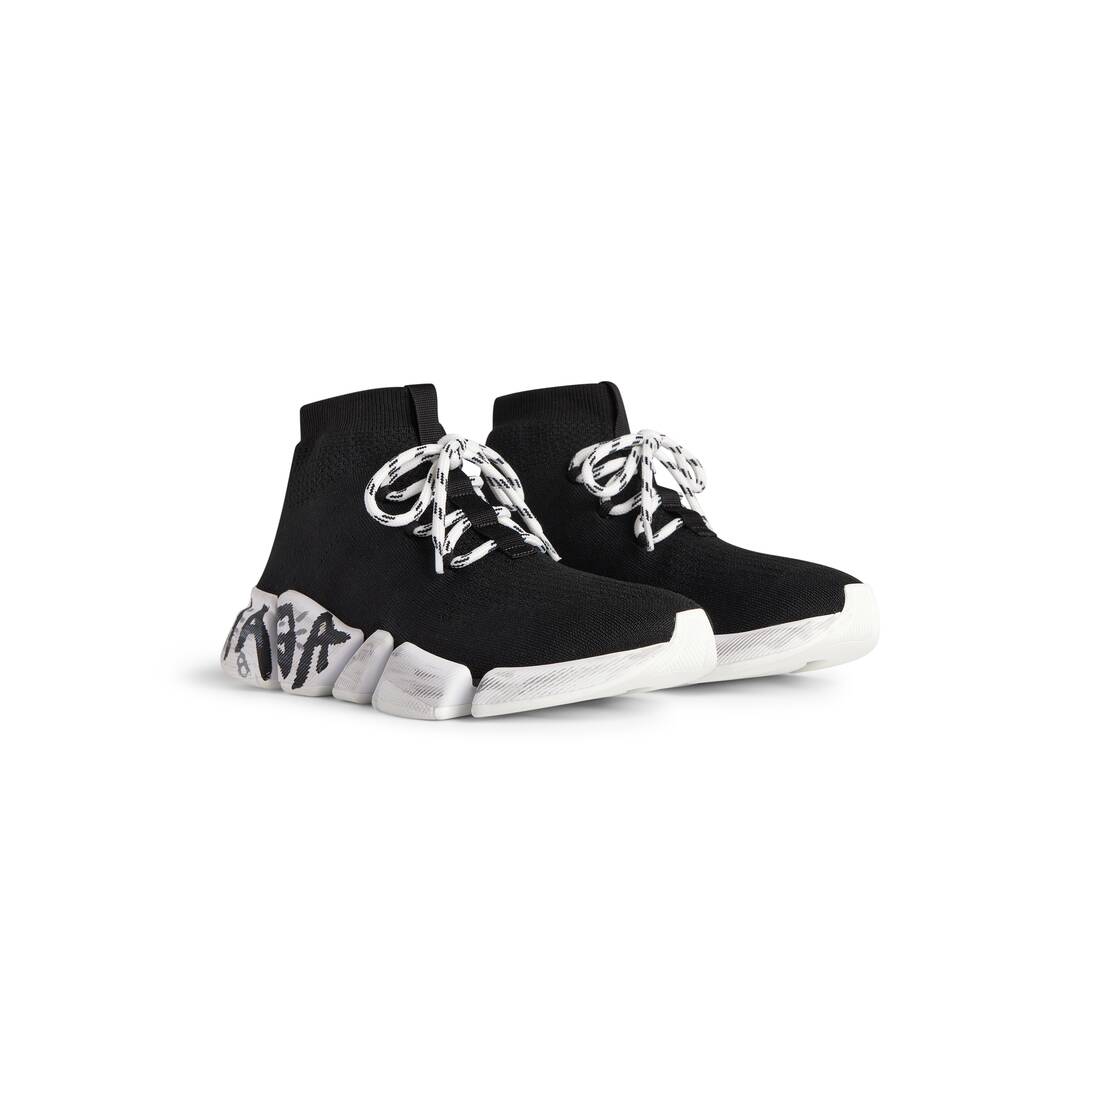 Men's Speed 2.0 Lace-up Graffiti Recycled Knit Sneaker in Black